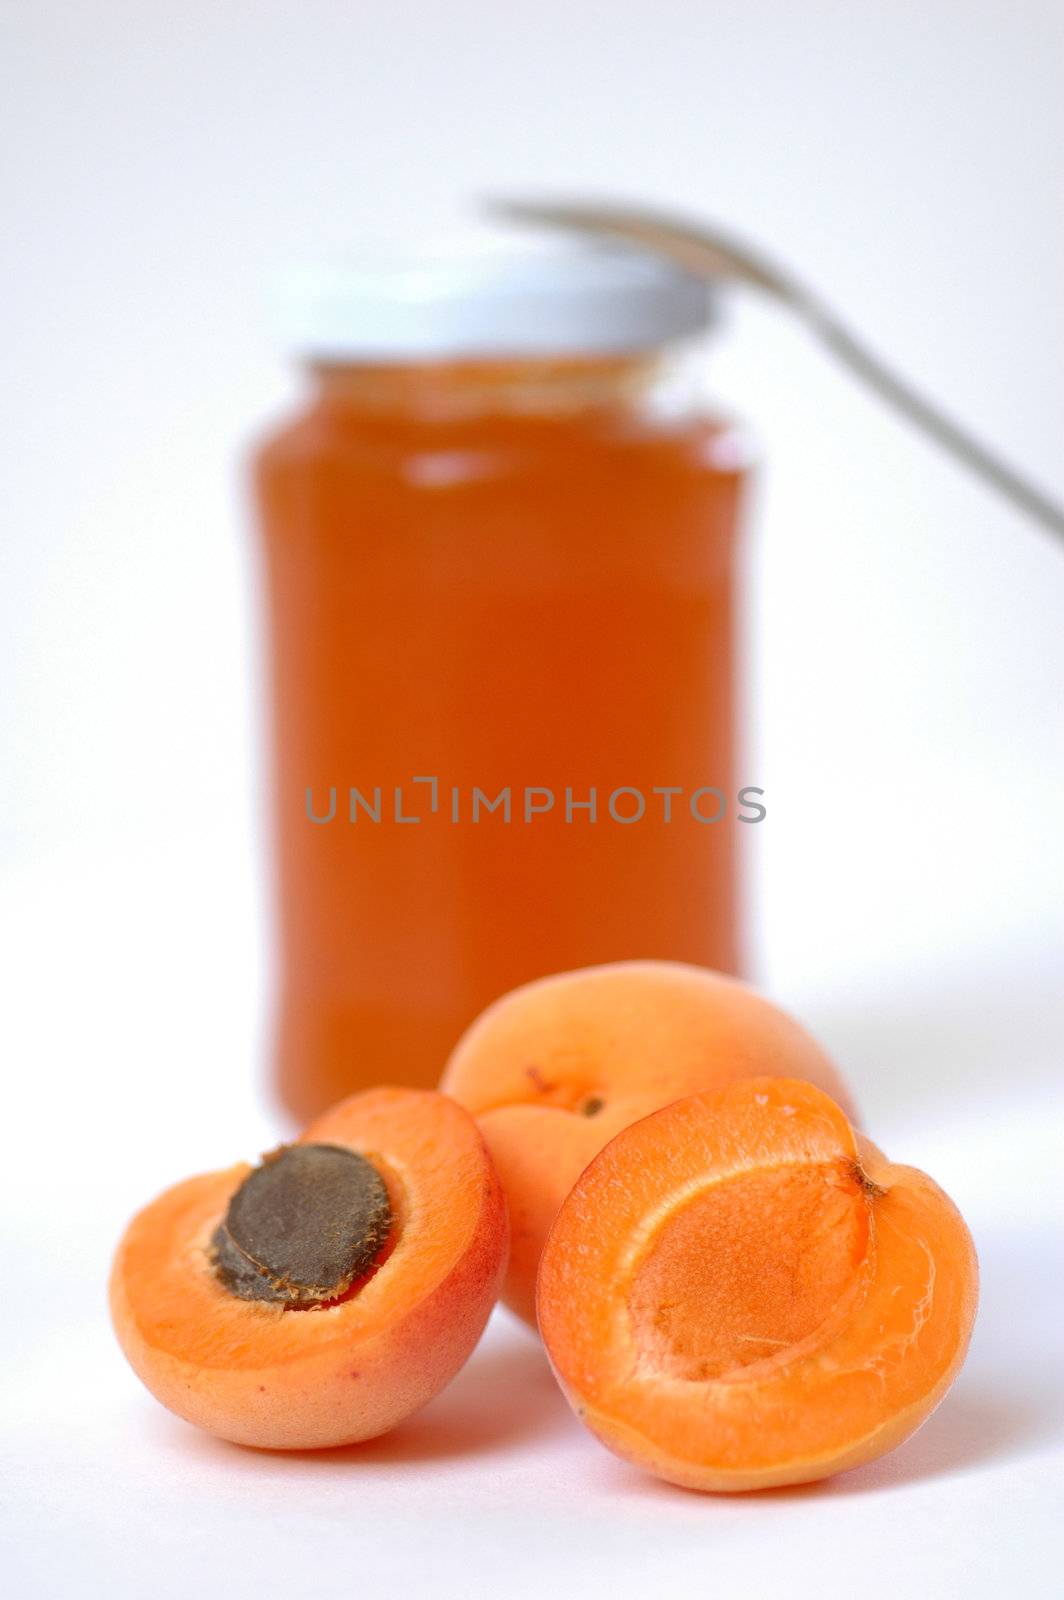 Apricot jam with two apricots in foreground